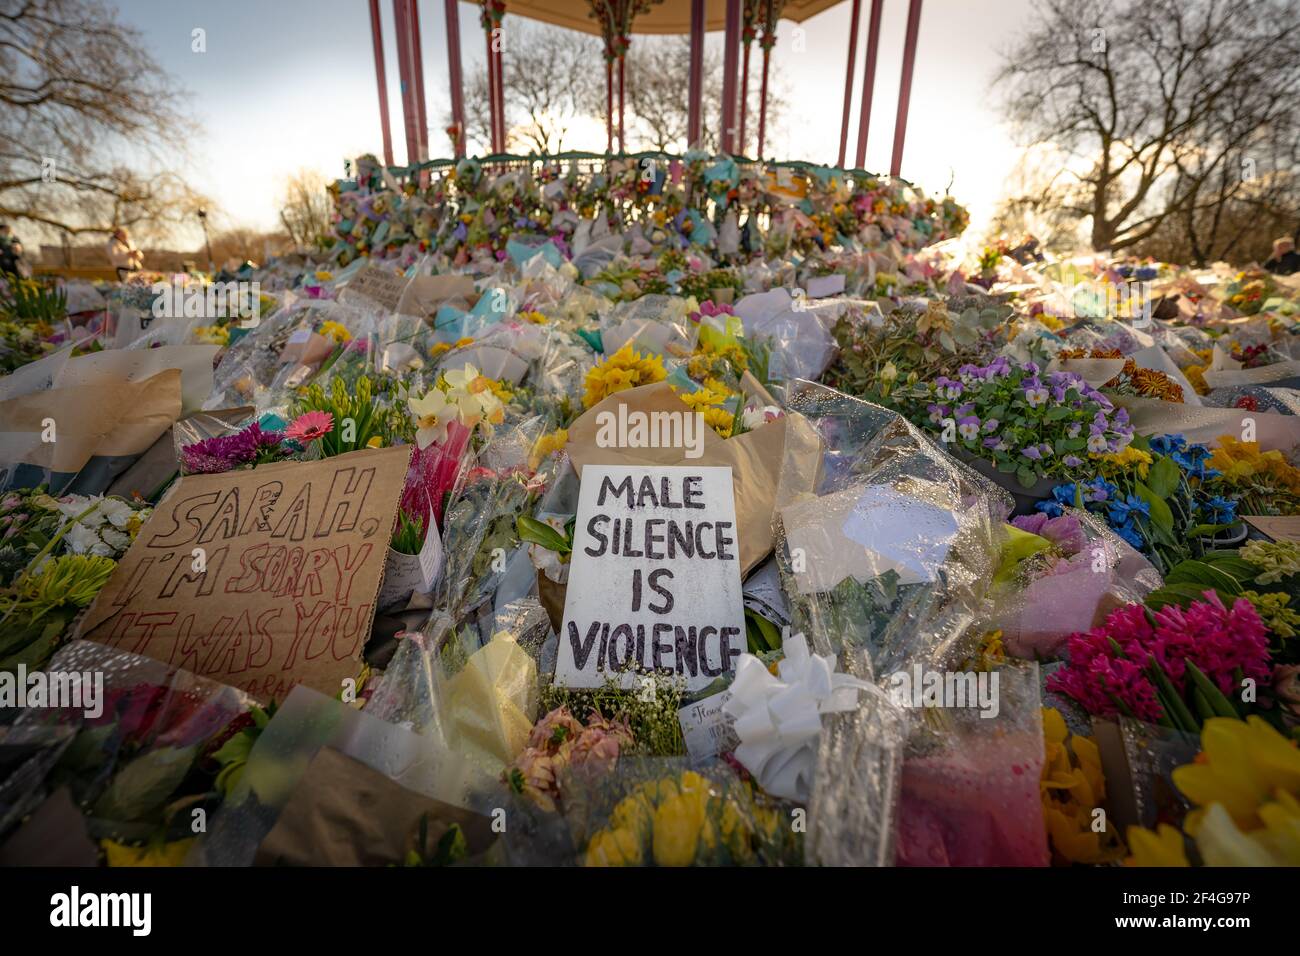 London, UK. 21st March, 2021. Death of Sarah Everard: Floral tributes continue at Clapham Common bandstand in memory of murdered 33-year-old marketing executive Sarah Everard who went missing on Wednesday 3rd March after leaving a friend's house near Clapham Common to walk home. Credit: Guy Corbishley/Alamy Live News Stock Photo